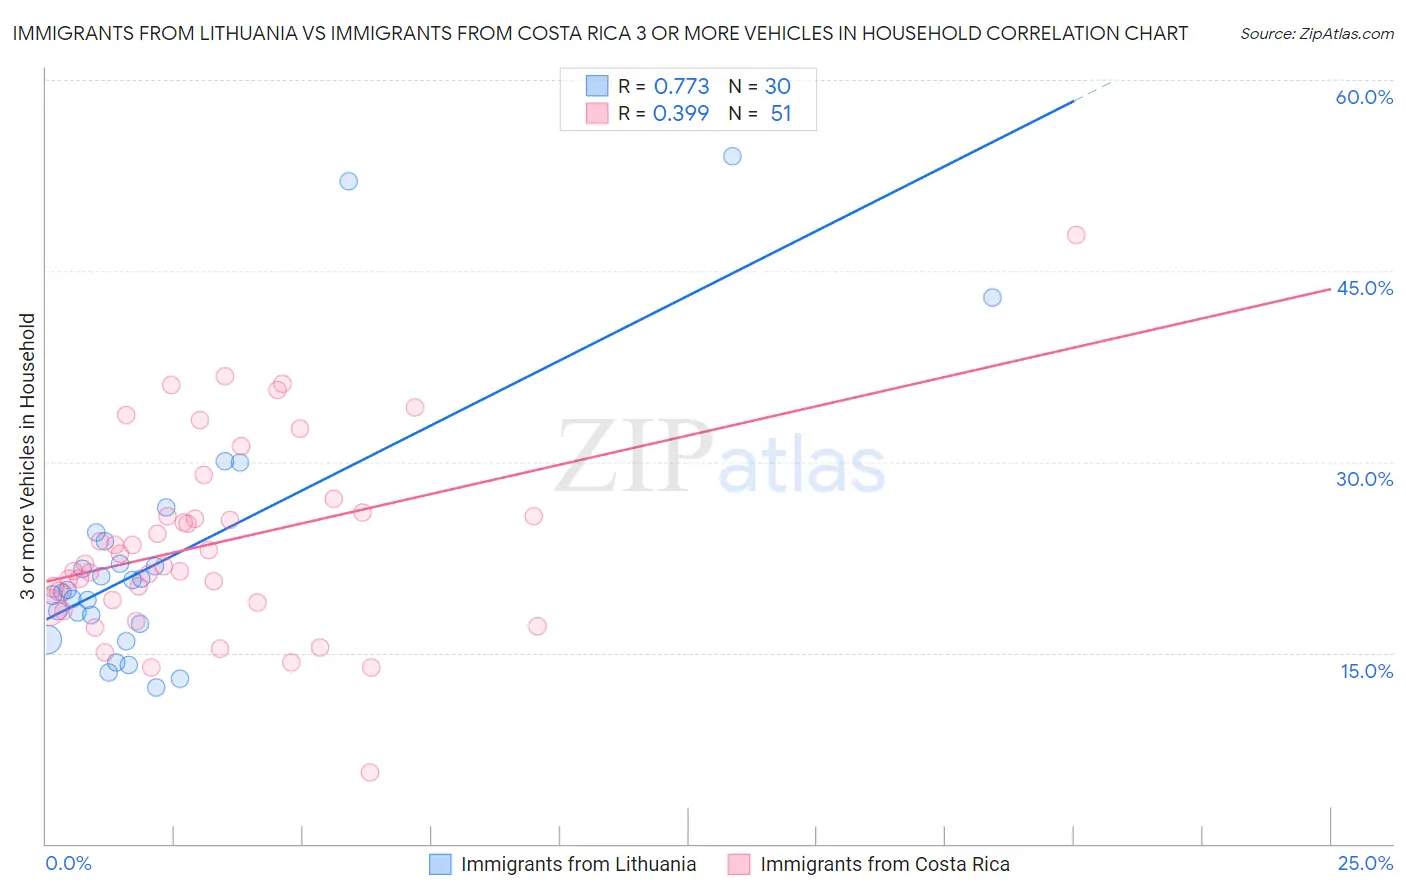 Immigrants from Lithuania vs Immigrants from Costa Rica 3 or more Vehicles in Household